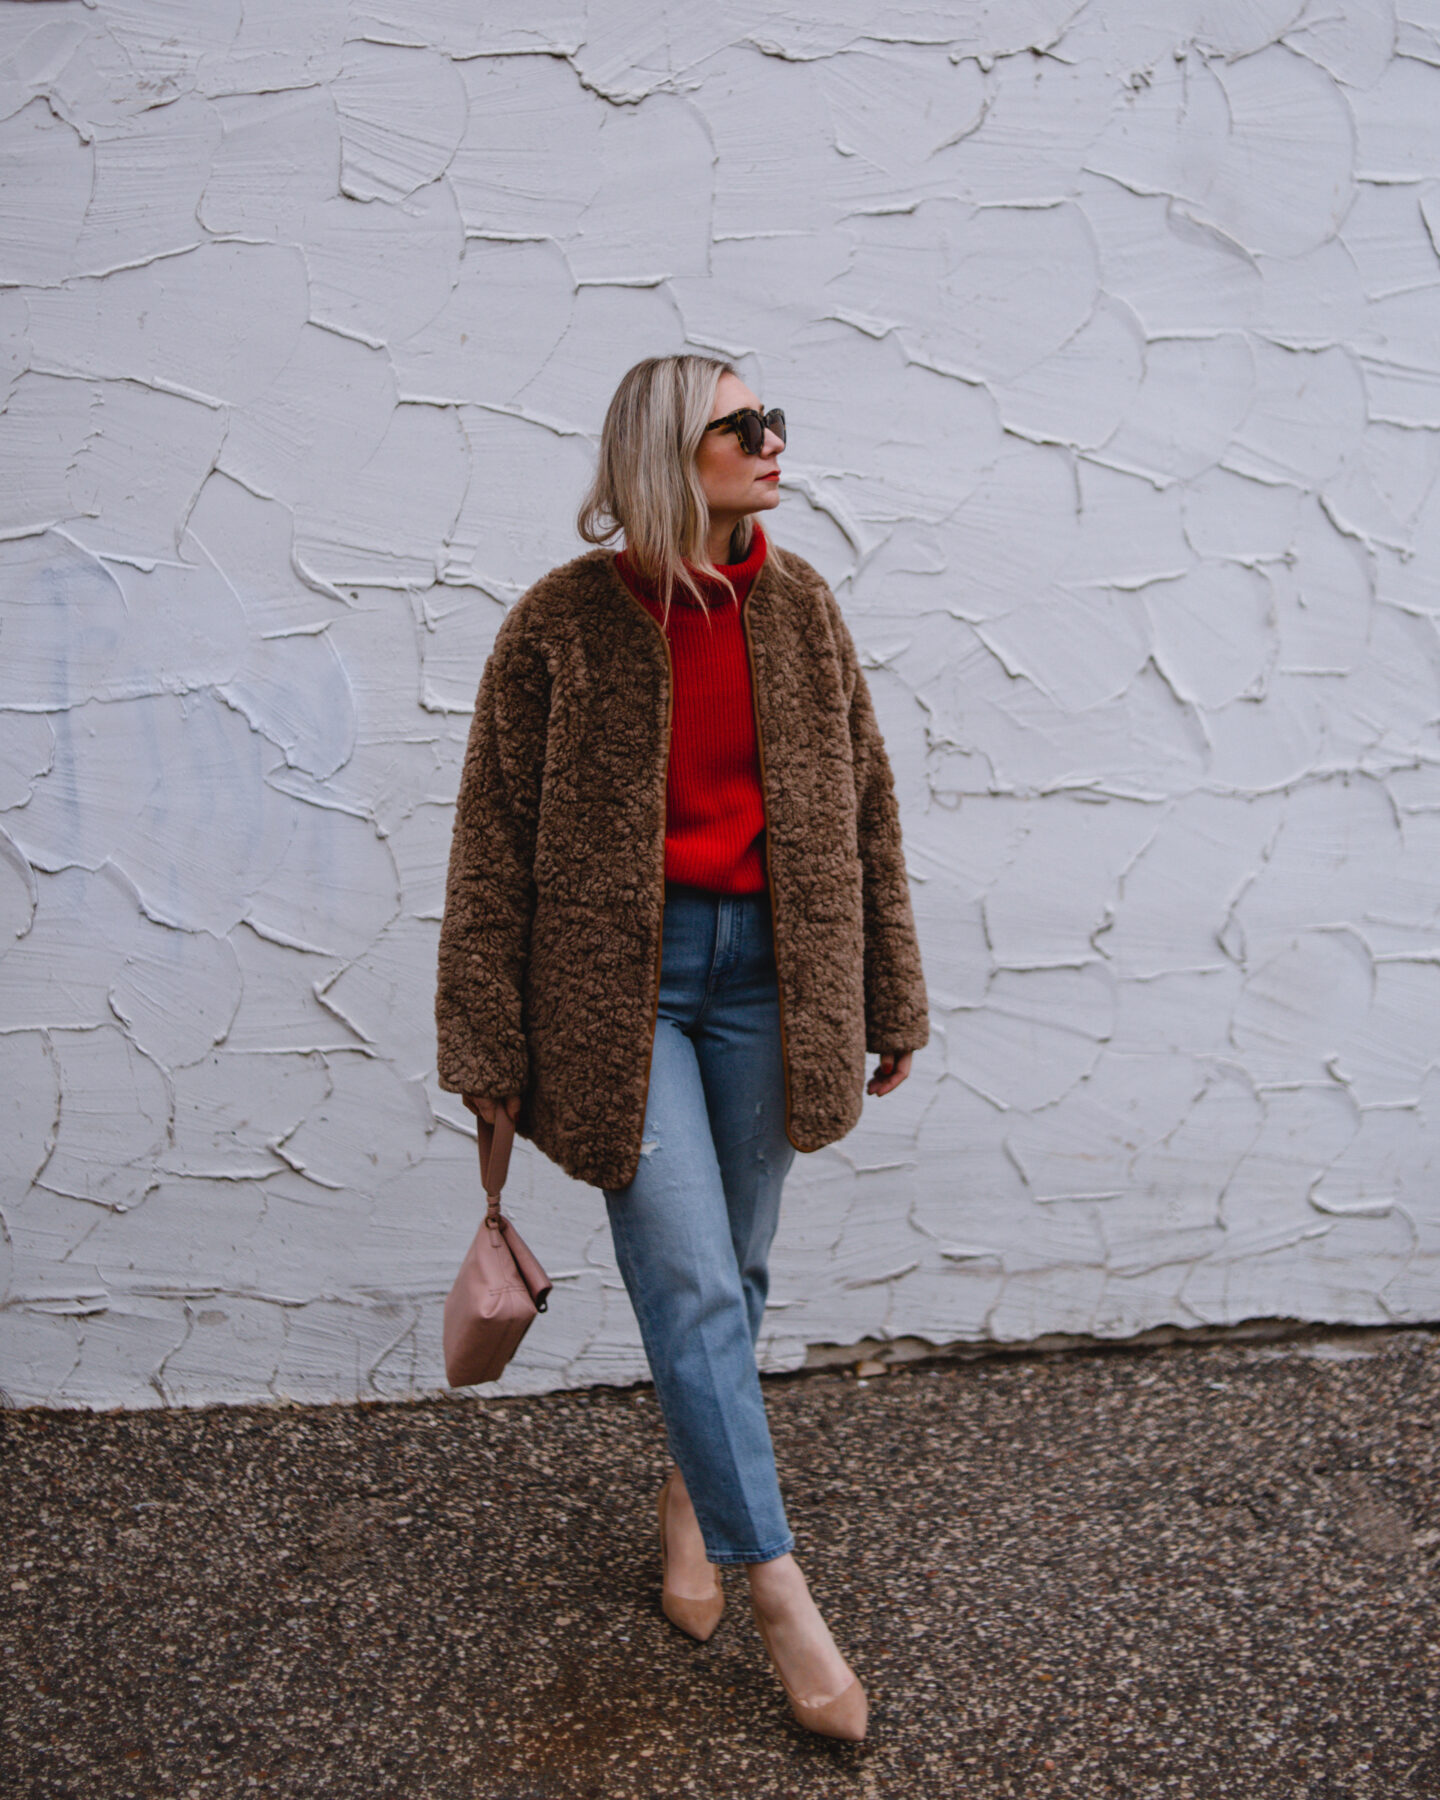 Karin Emily wears a red cashmere sweater, camel colored sherpa coat, and mid wash straight leg jeans, and nude suede heels